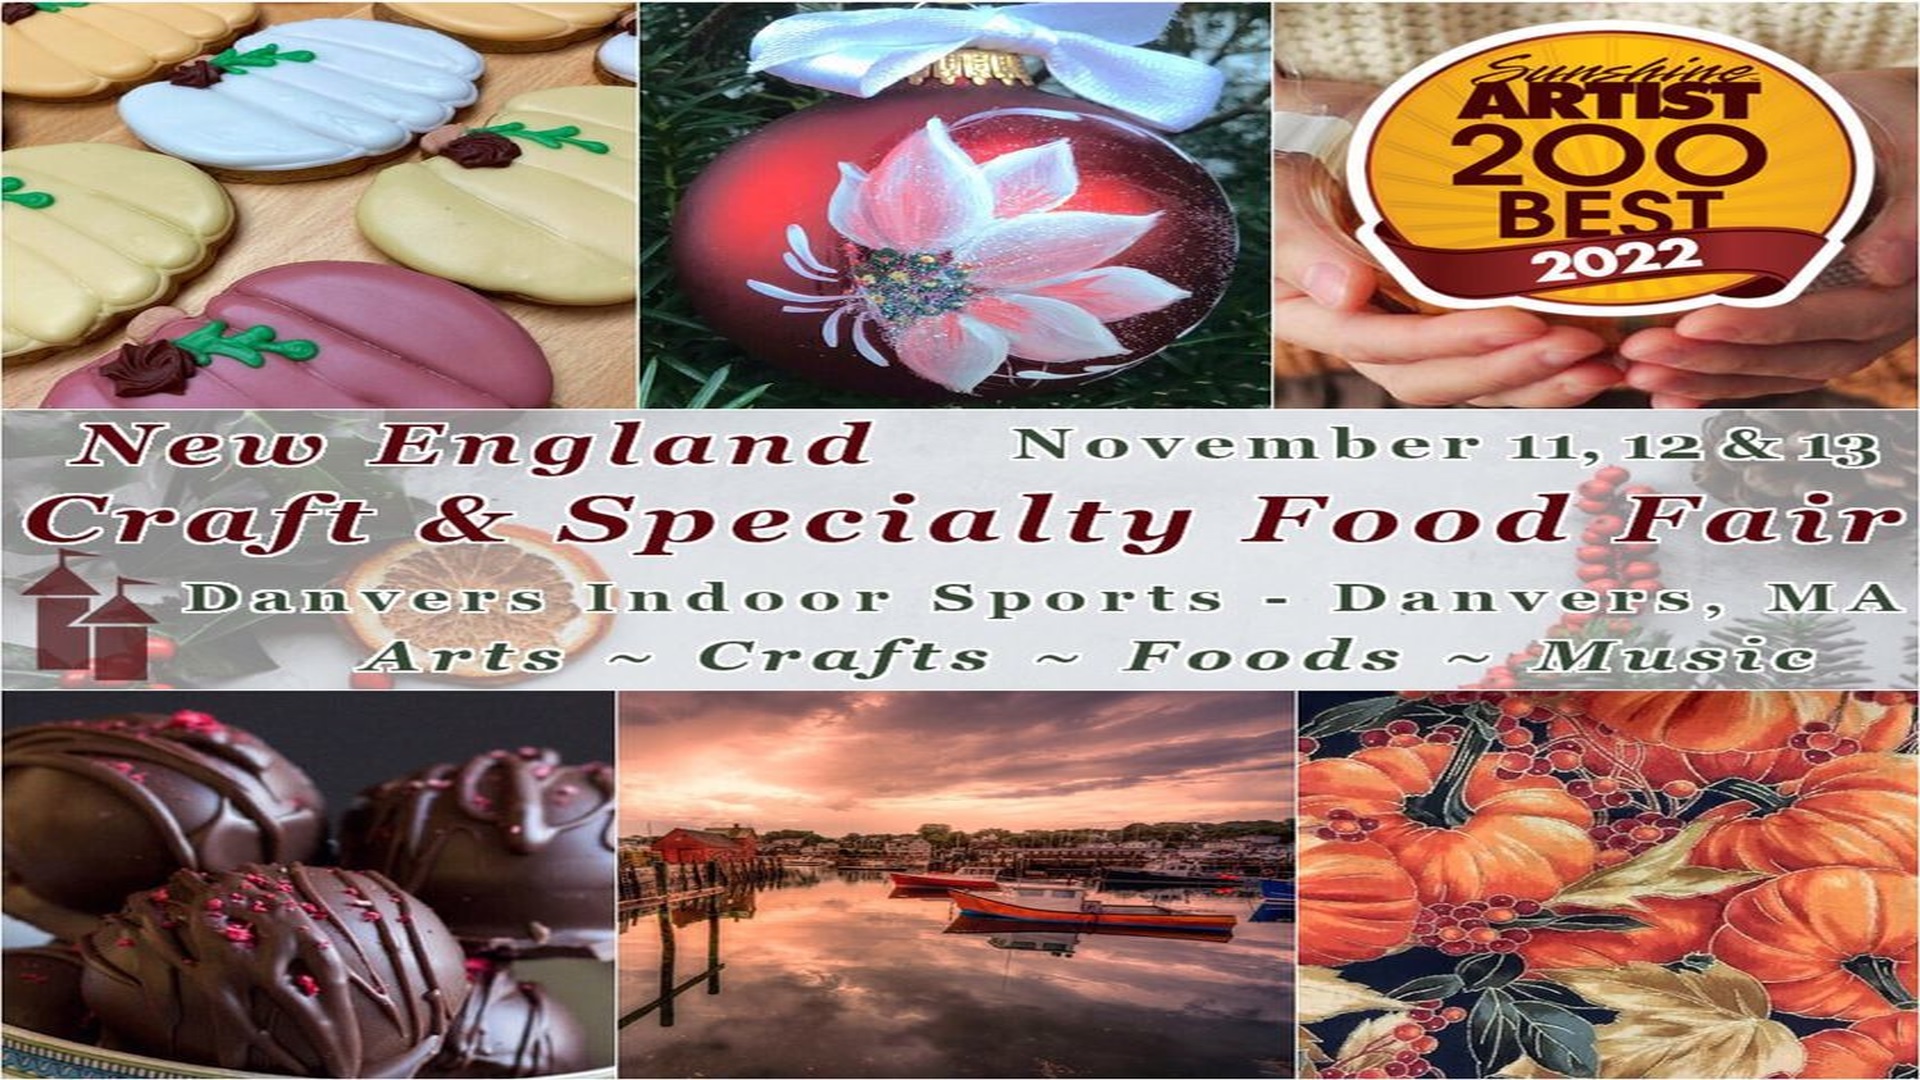 27th Annual New England Craft and Specialty Food Fair, Danvers, Massachusetts, United States